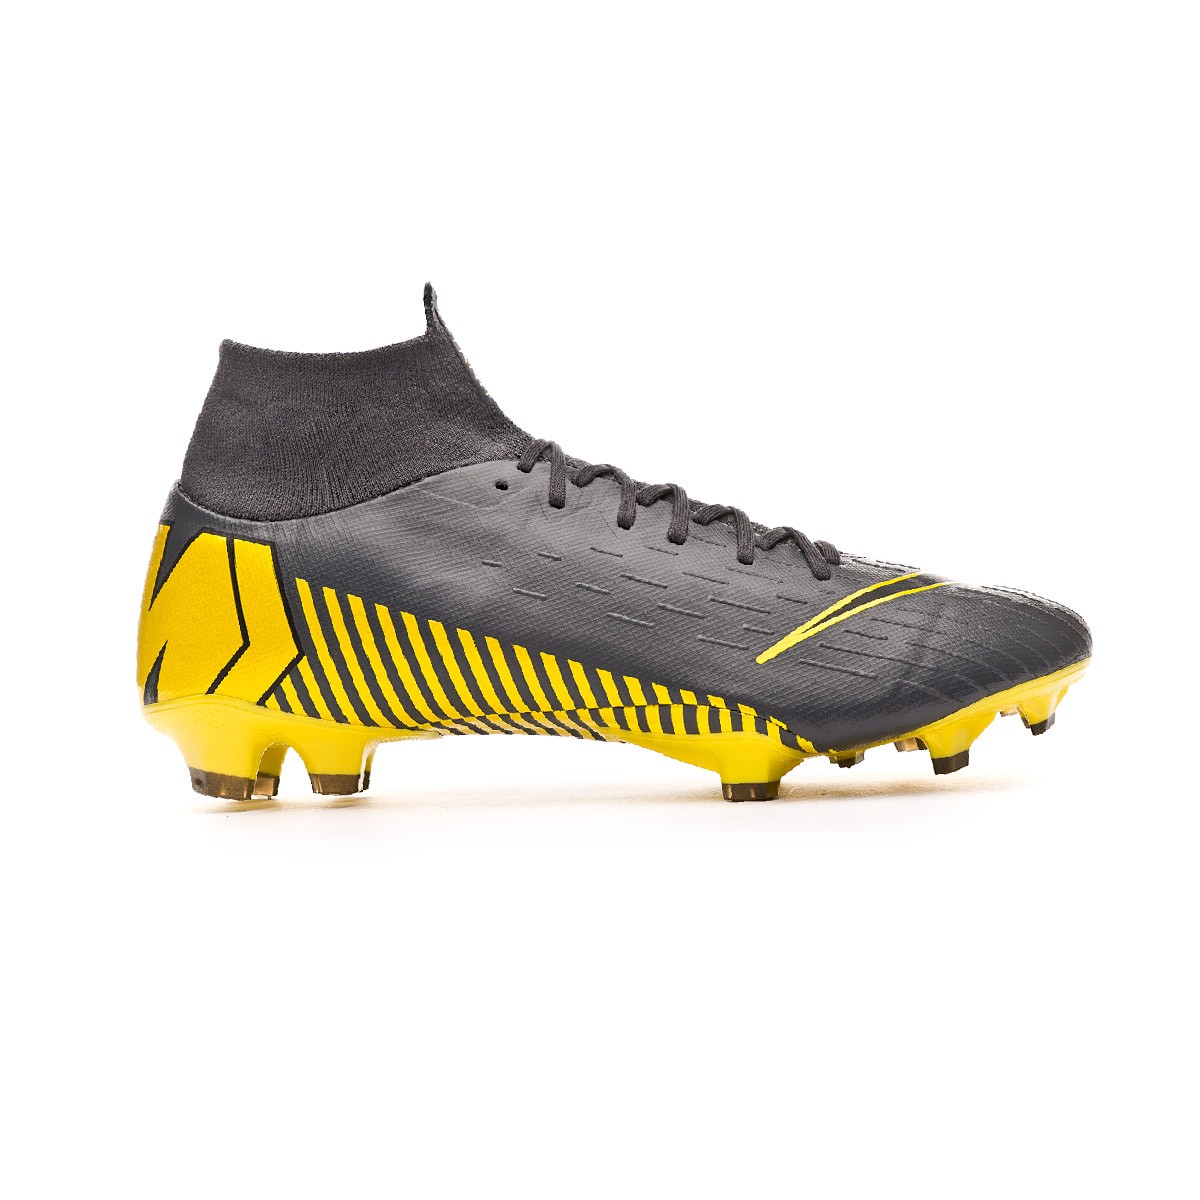 yellow and black nike football boots